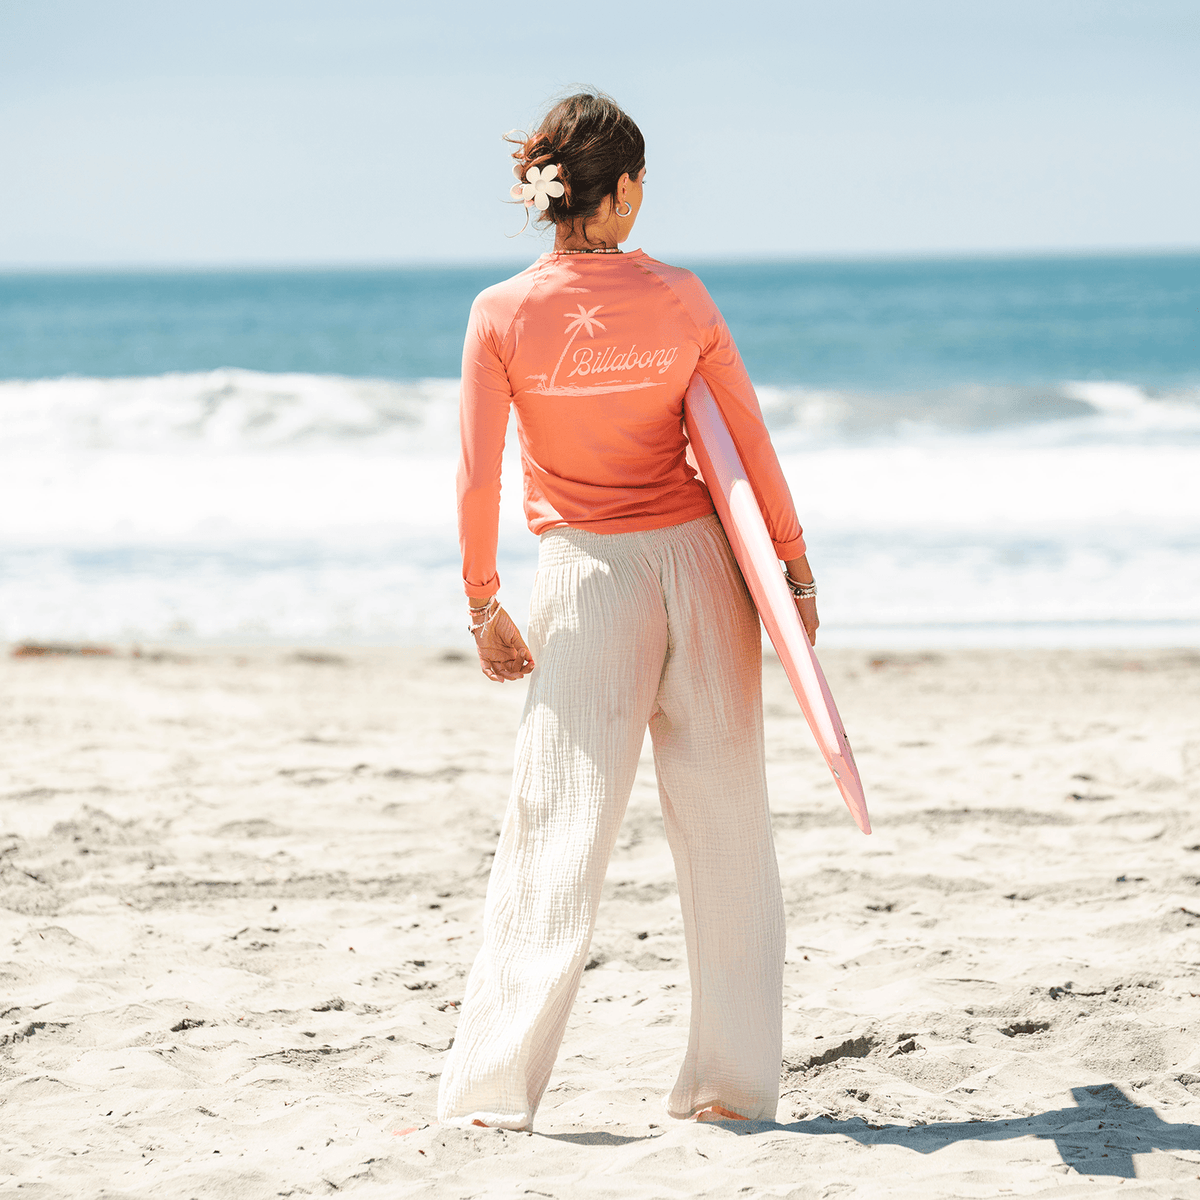 A girl standing on the beach and holding a surfboard while wearing cream wide leg cotton pants